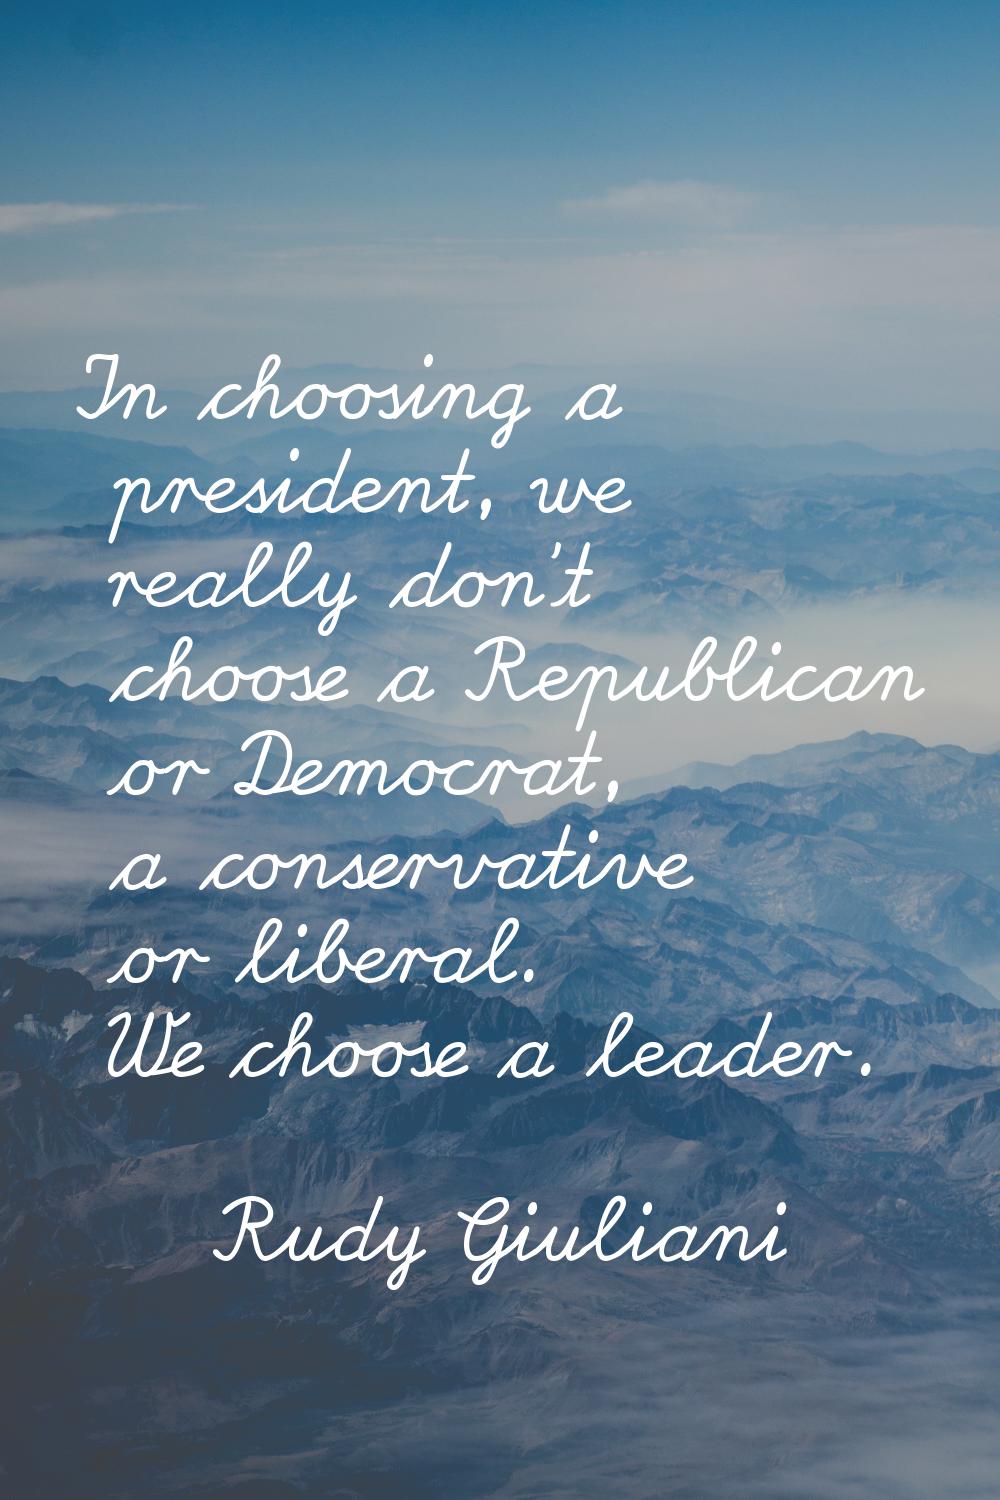 In choosing a president, we really don't choose a Republican or Democrat, a conservative or liberal